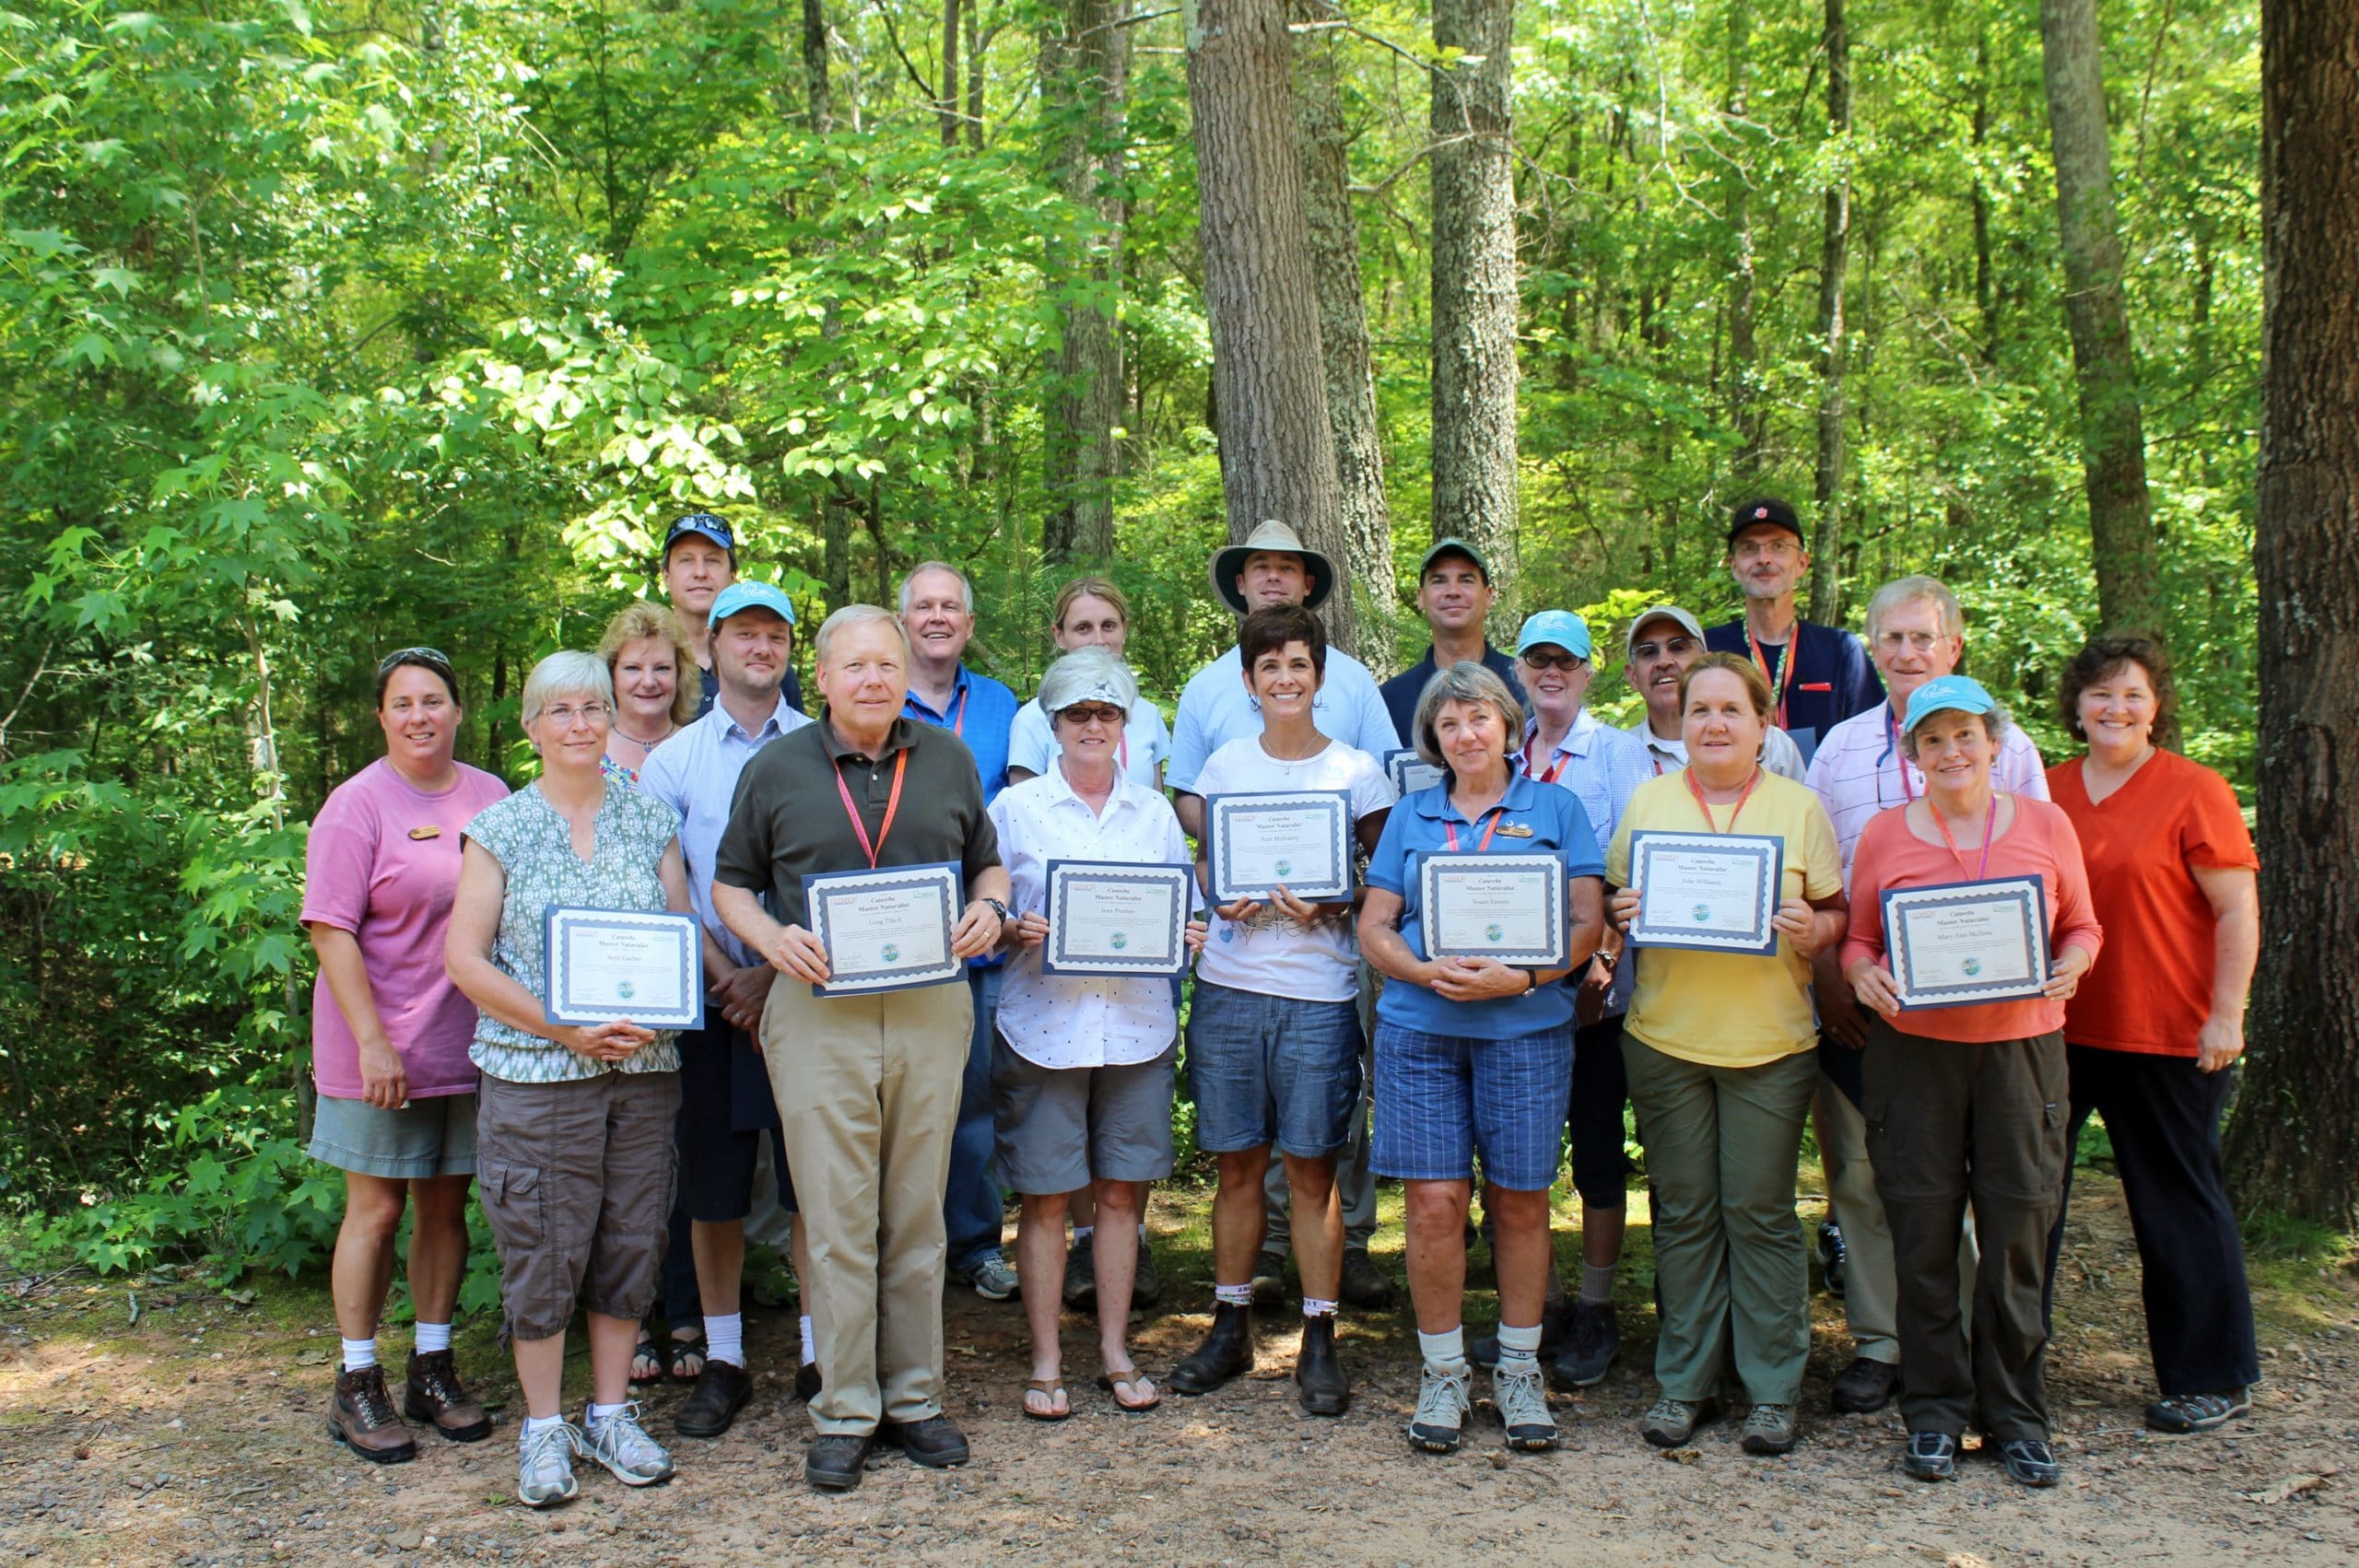 alt=Photo of students of the Catawba Naturalist Program posing and smiling with their certificates outside of the Anne Springs Close Greenway